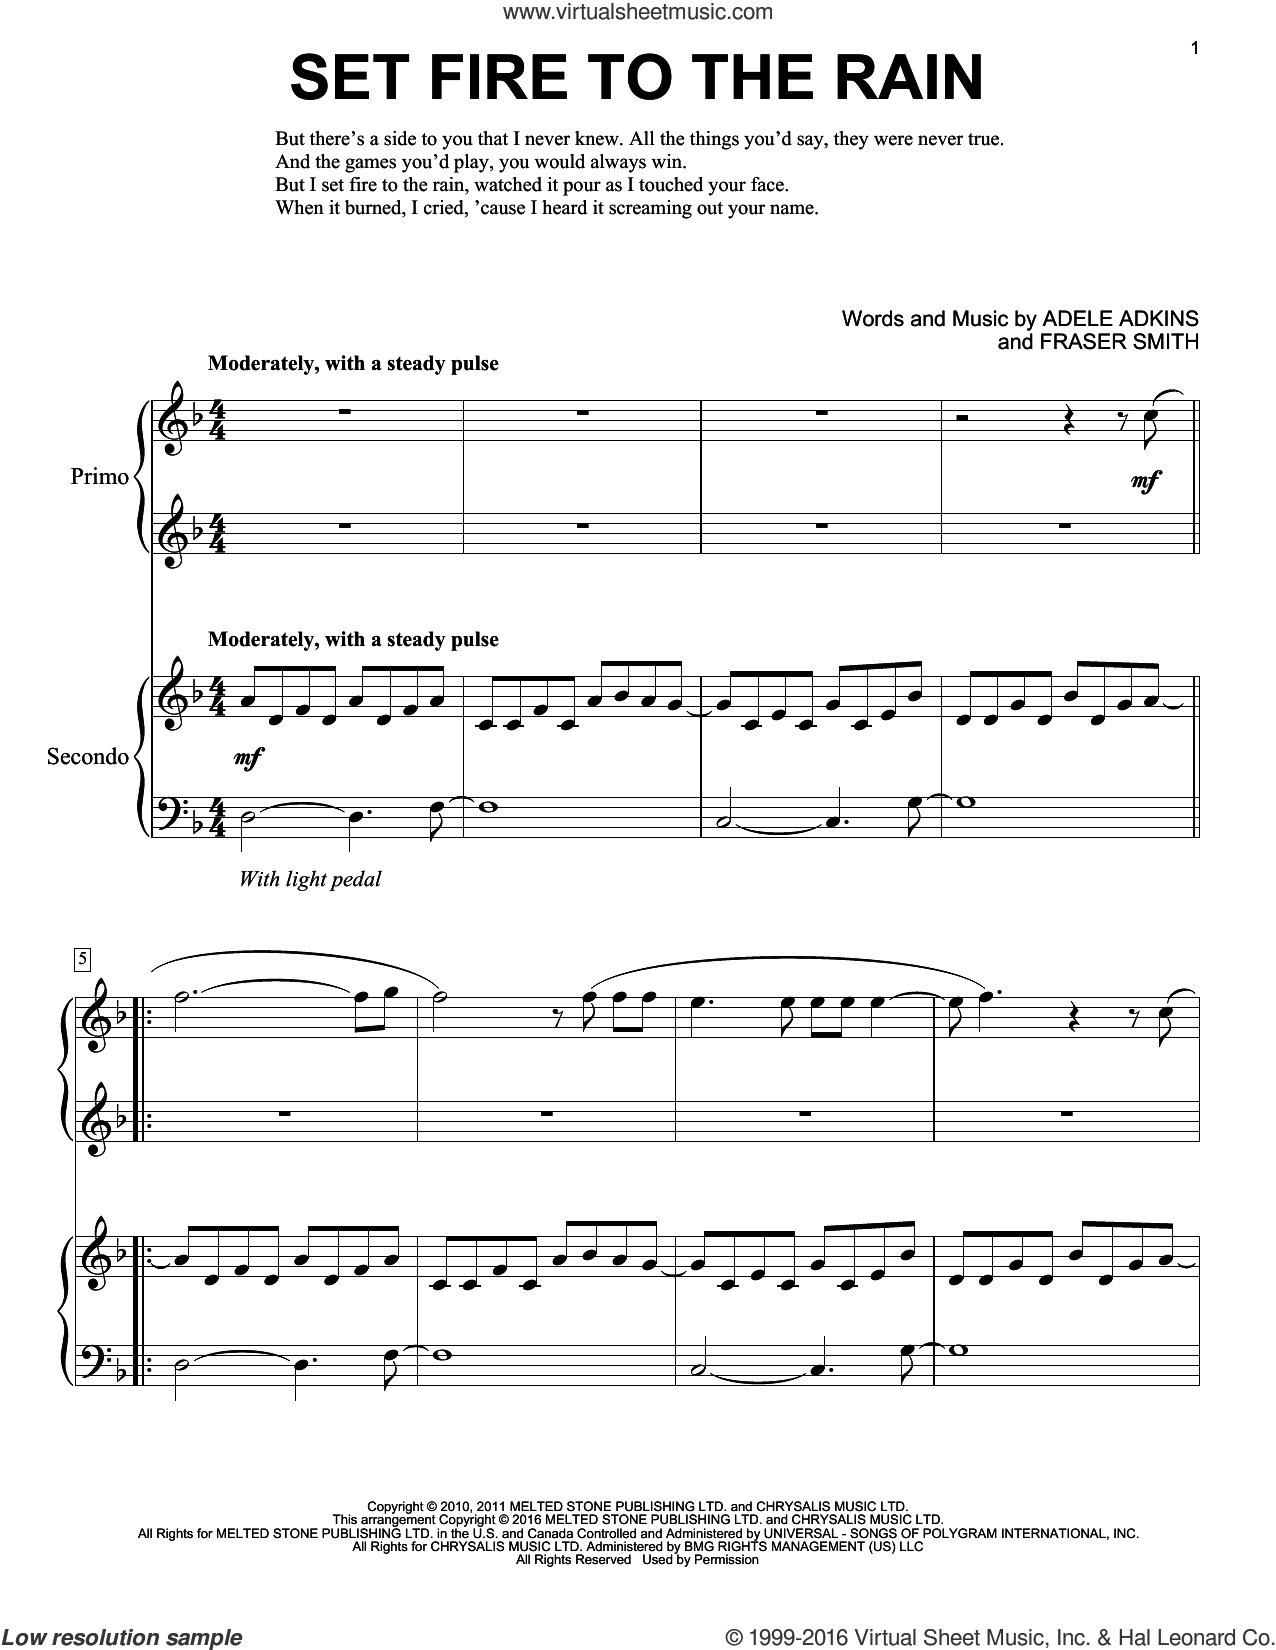 Adele - Set Fire To The Rain sheet music for piano four hands